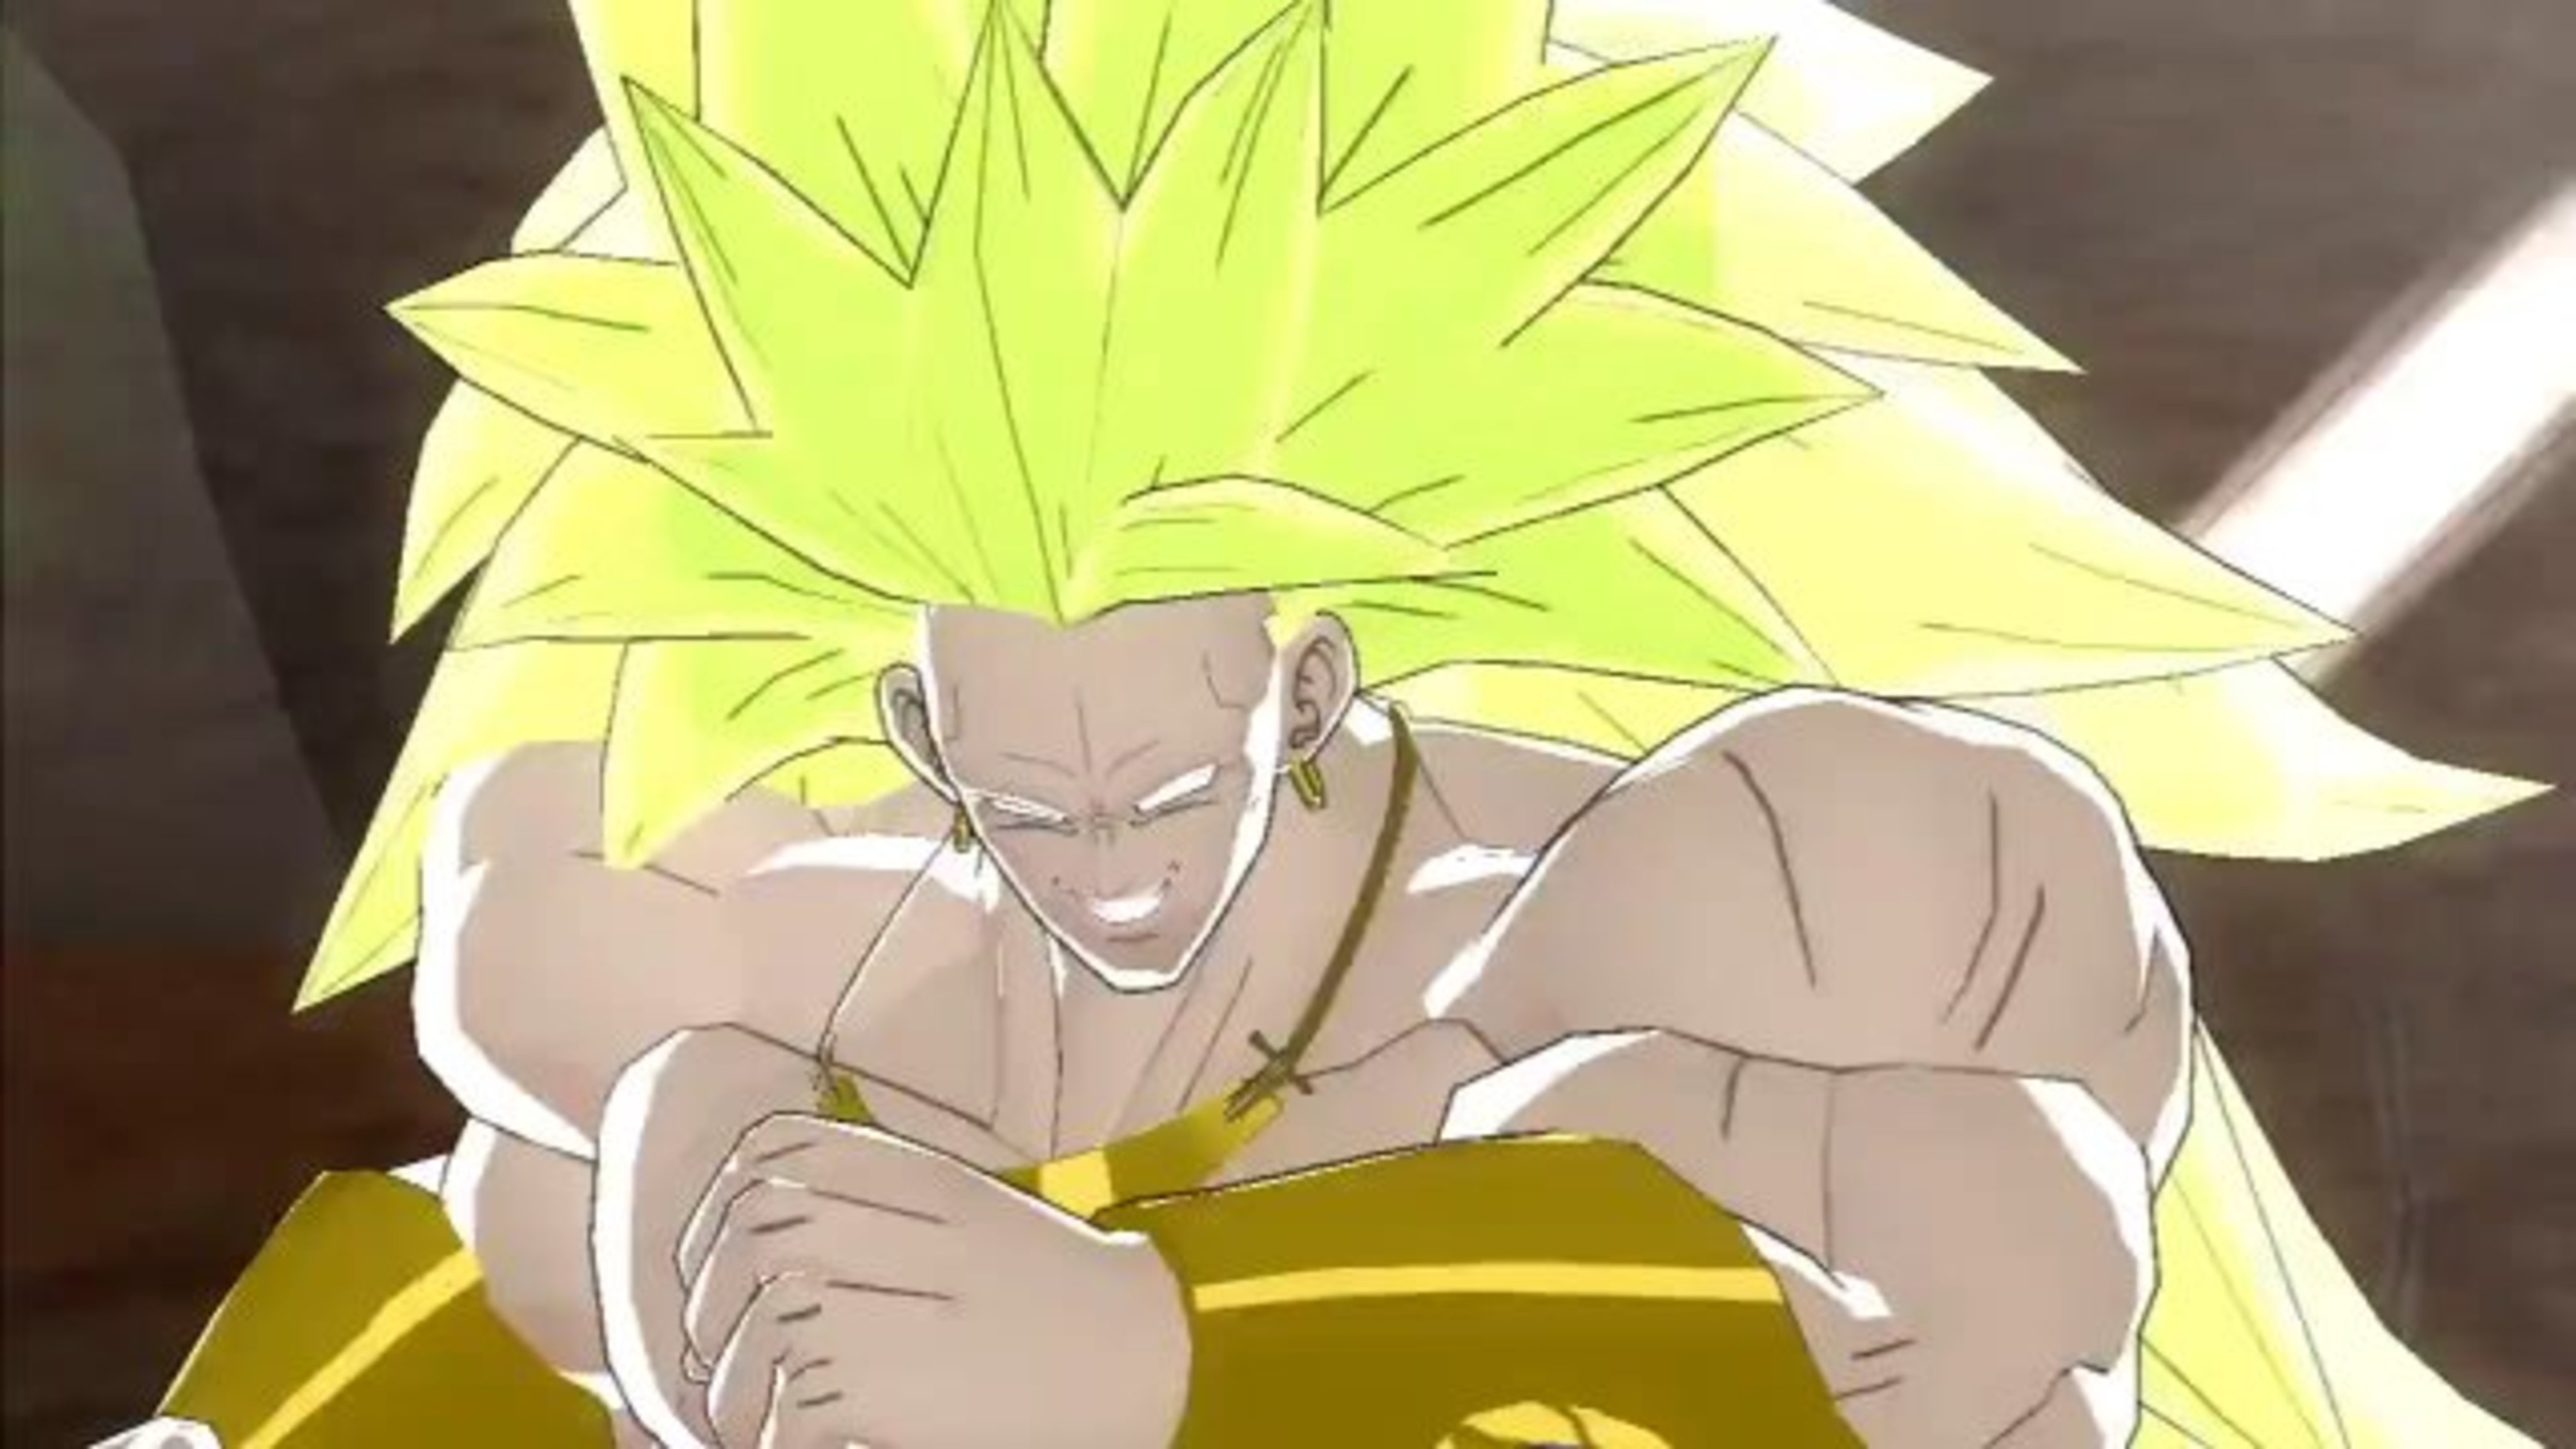 He is the lengendary 1st super saiyan. Super saiyan 3 broly ( in game not